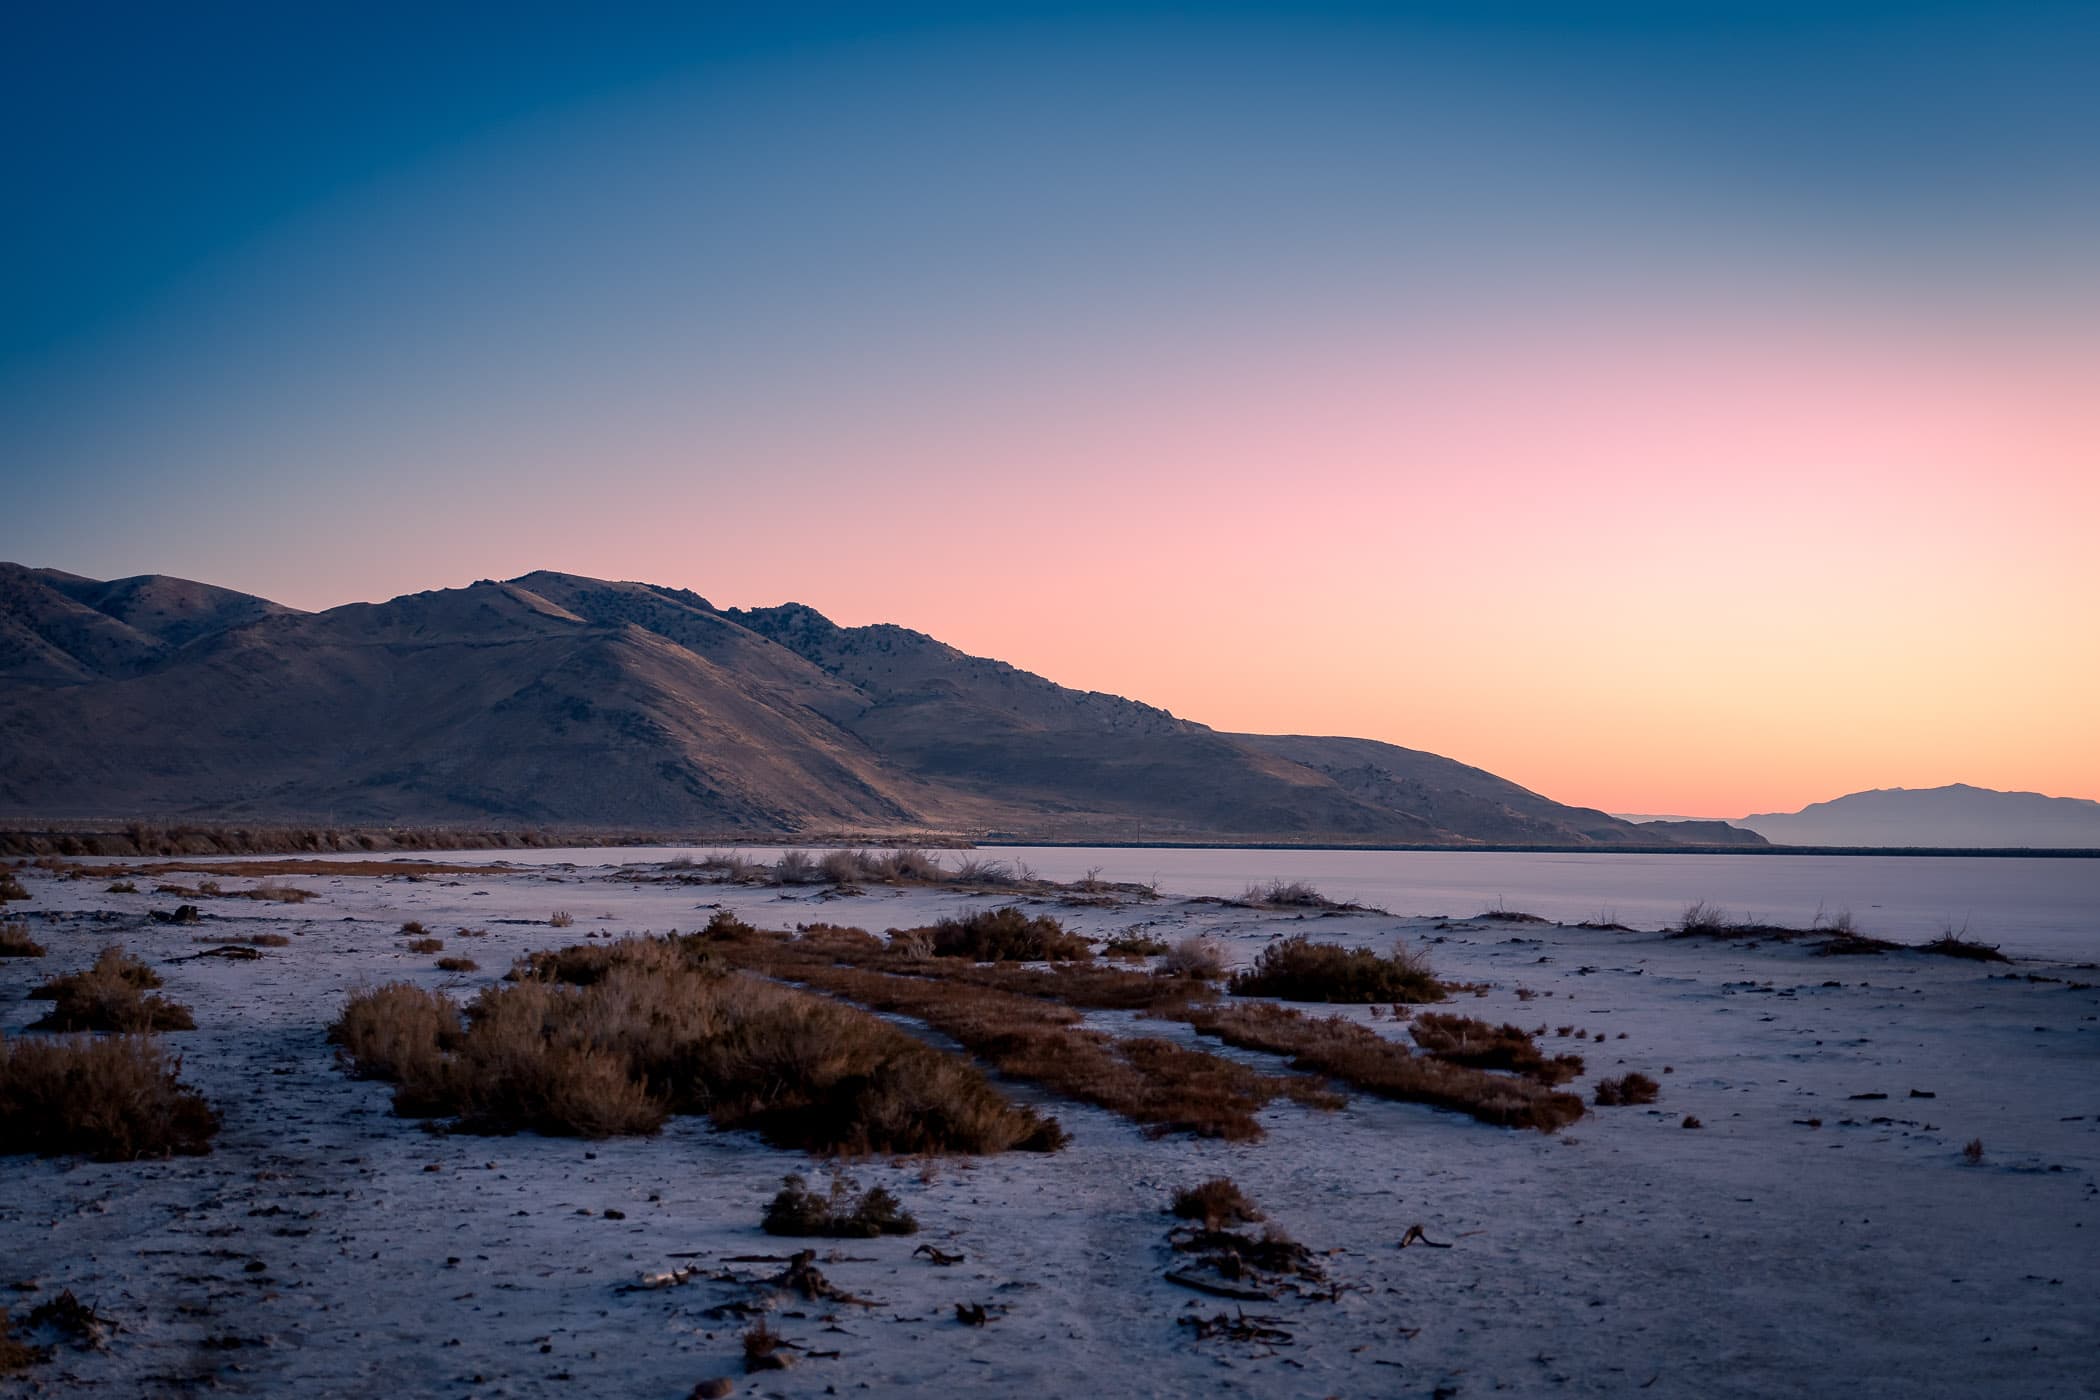 The sun rises on the mountainous Stansbury Island and the shoreline of the Great Salt Lake, Utah.